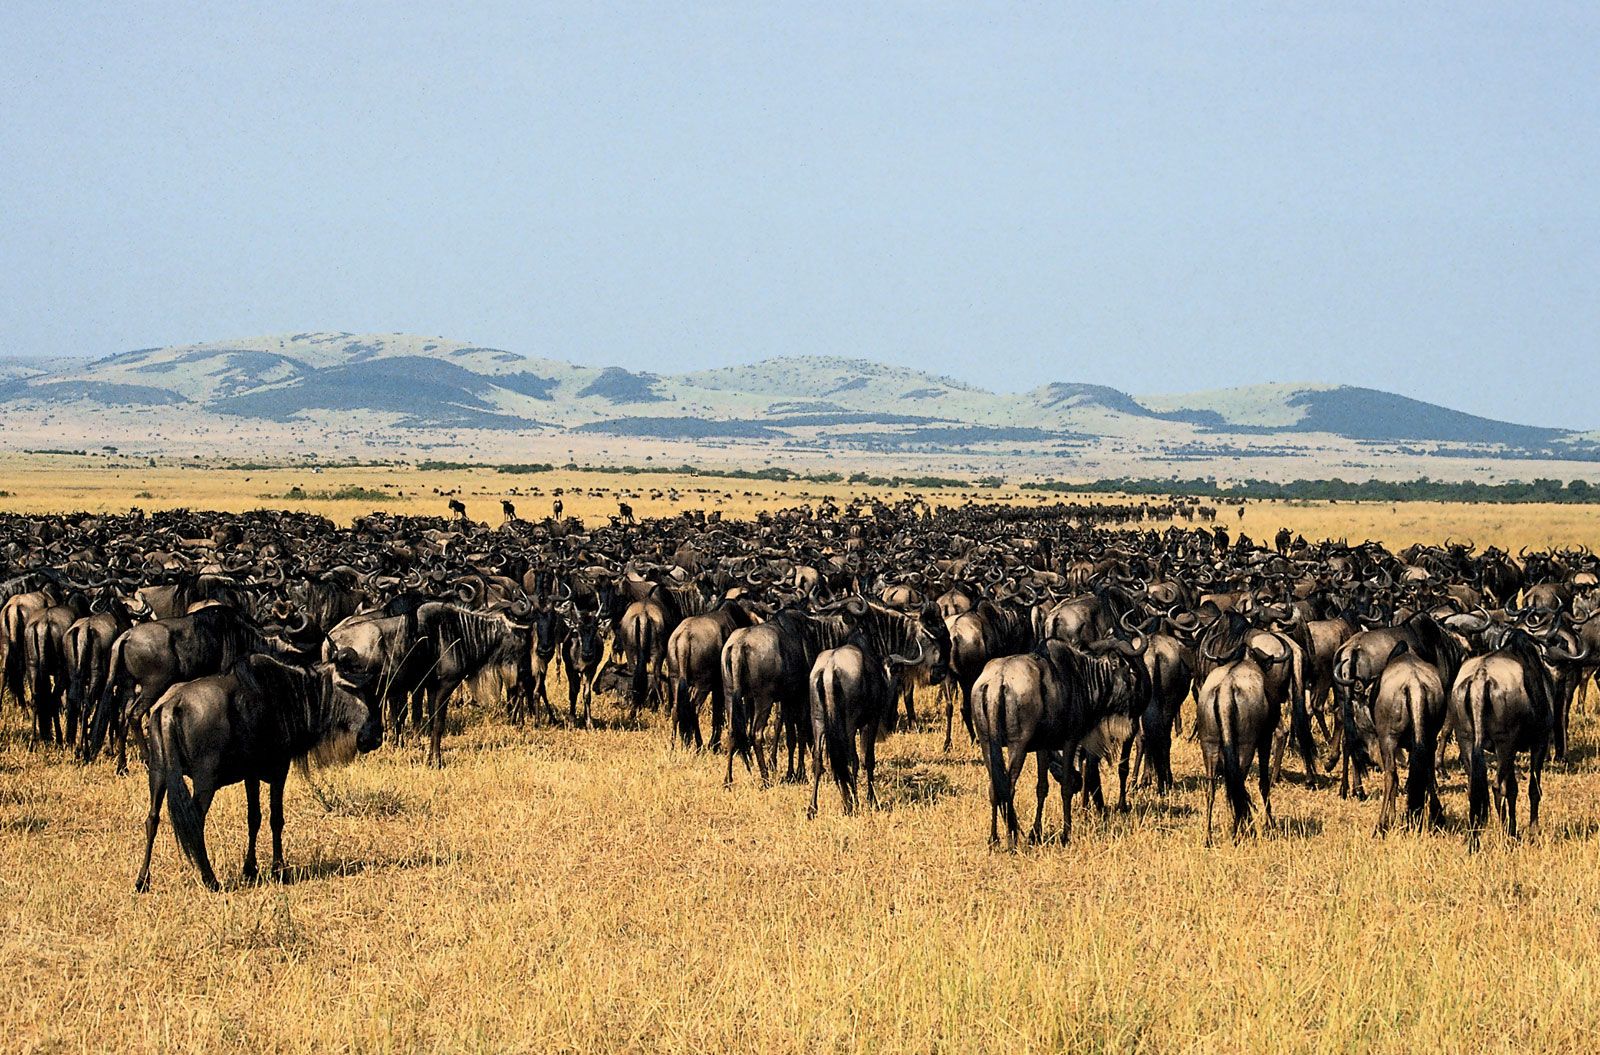 What Animals Can I Expect To See During A Tanzania Safari?